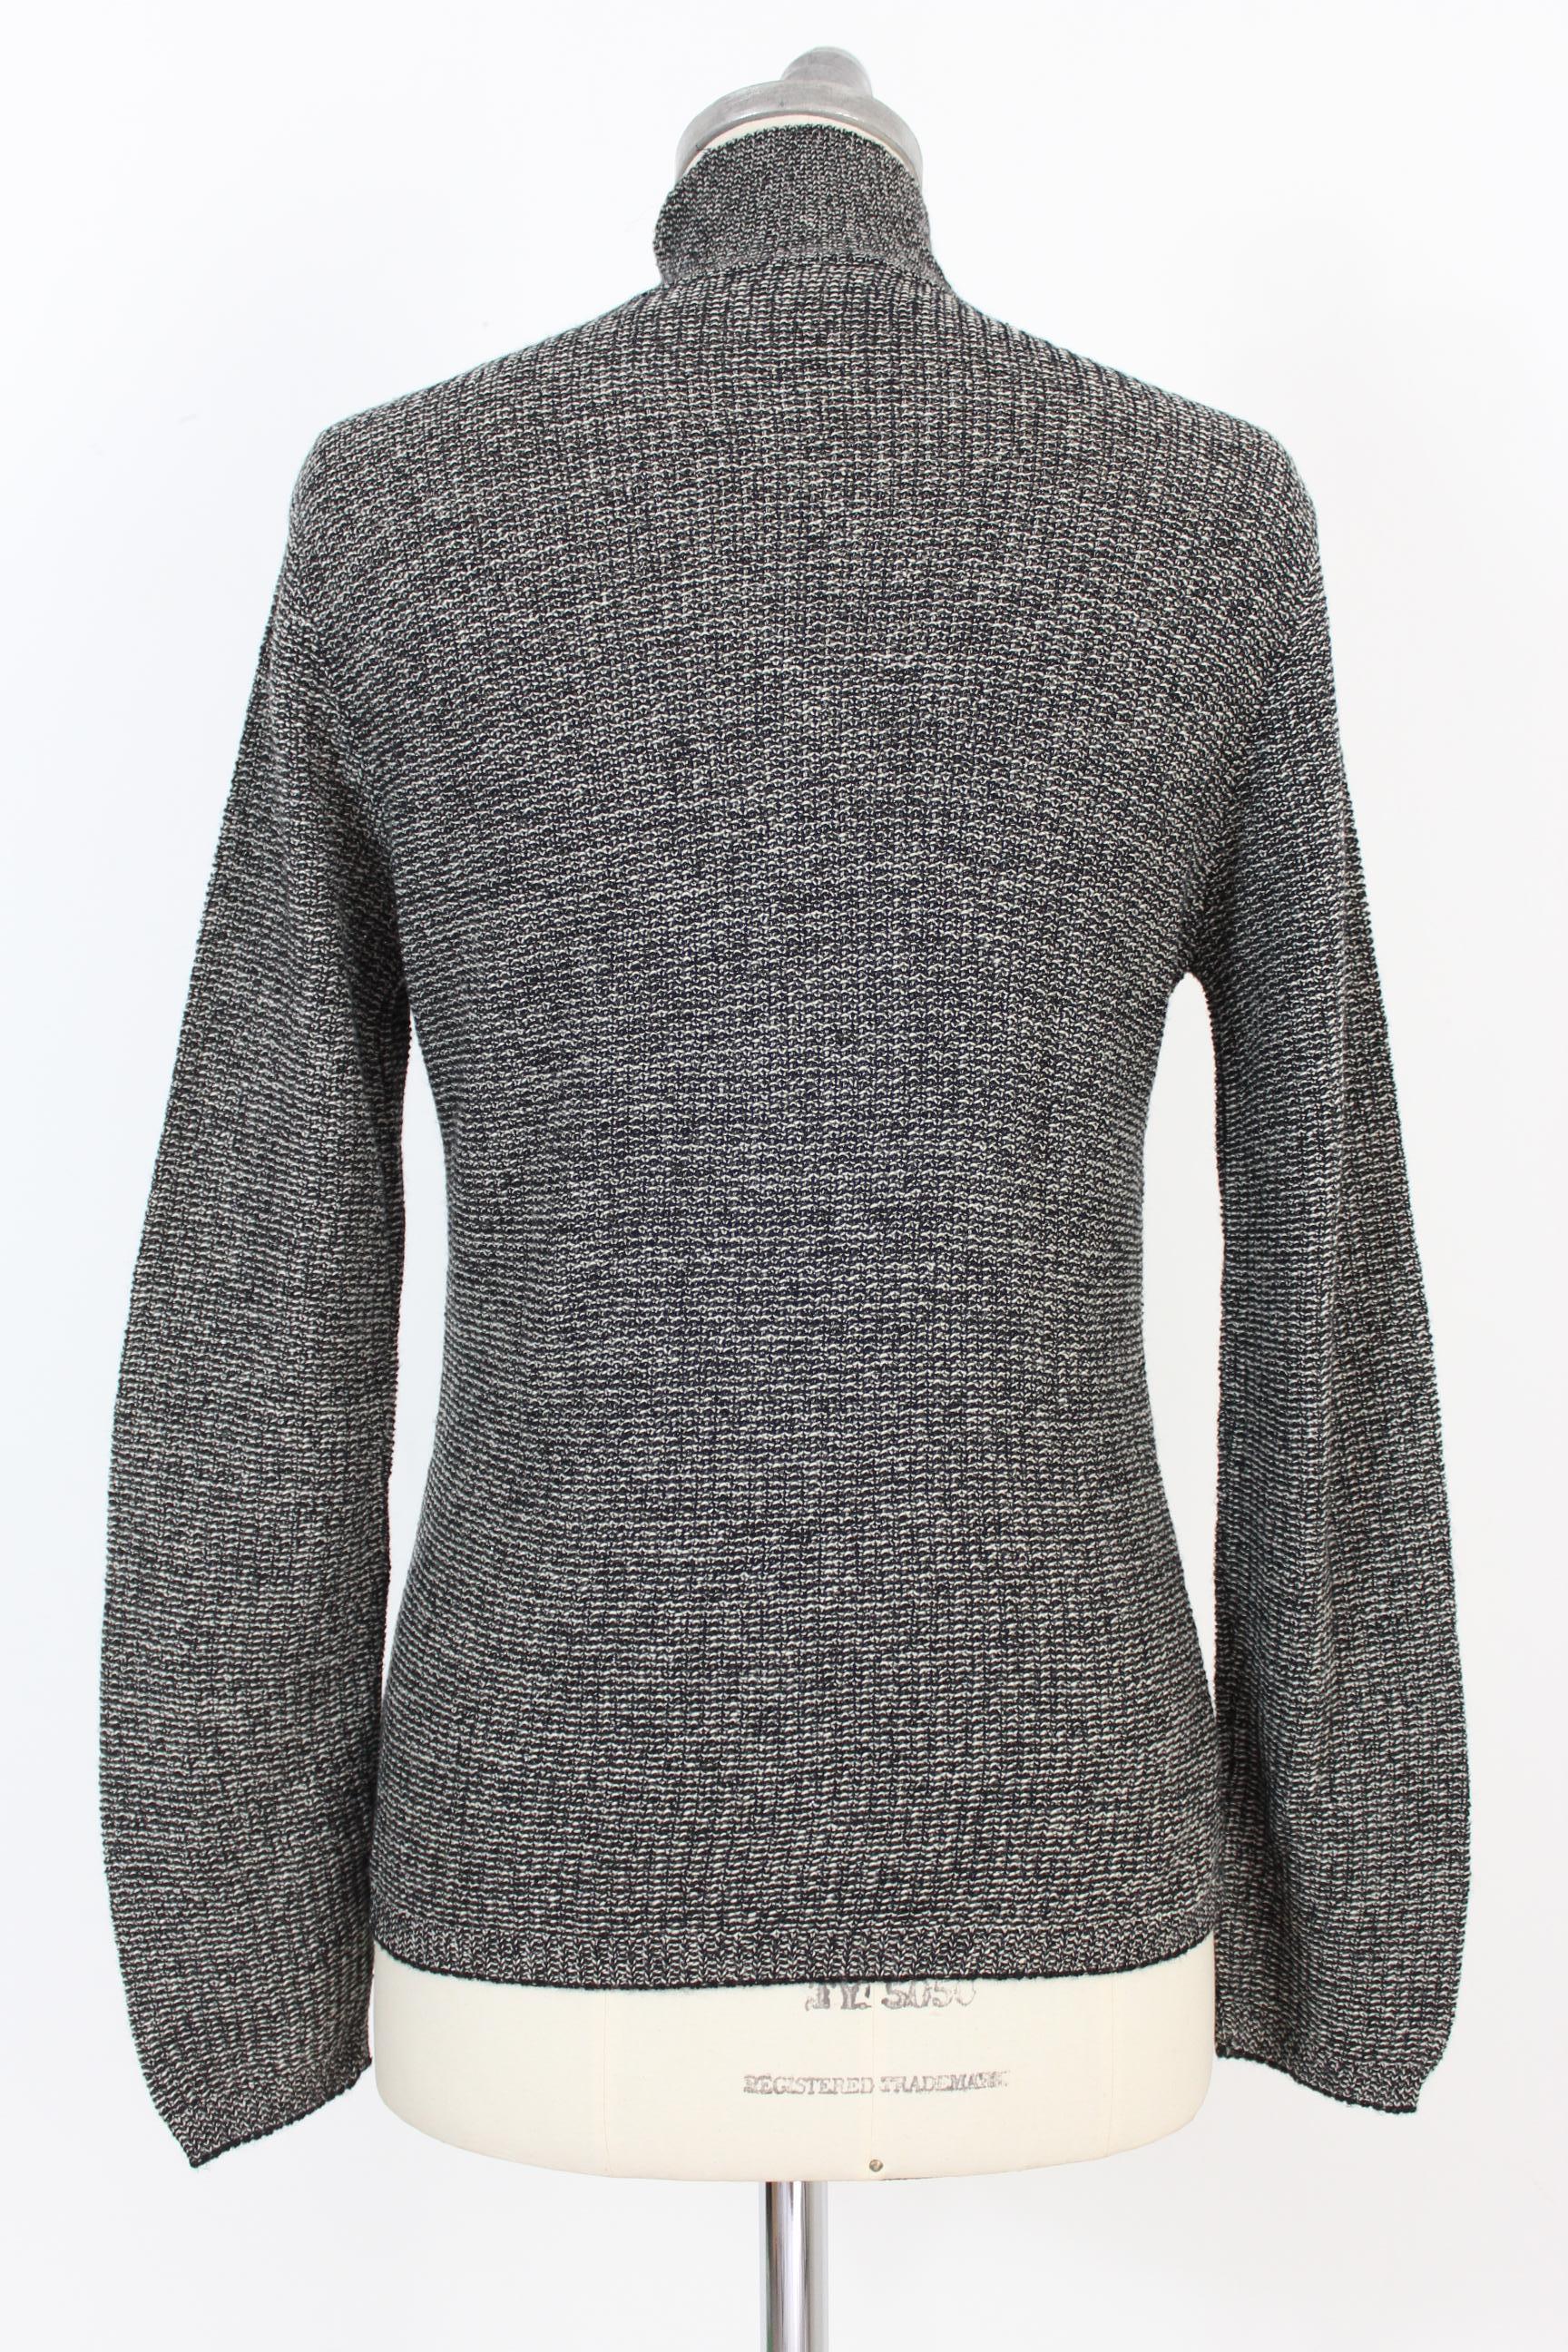 Genny by Gianni Versace Gray Salt Pepper Cashmere Turtleneck Sweater ...